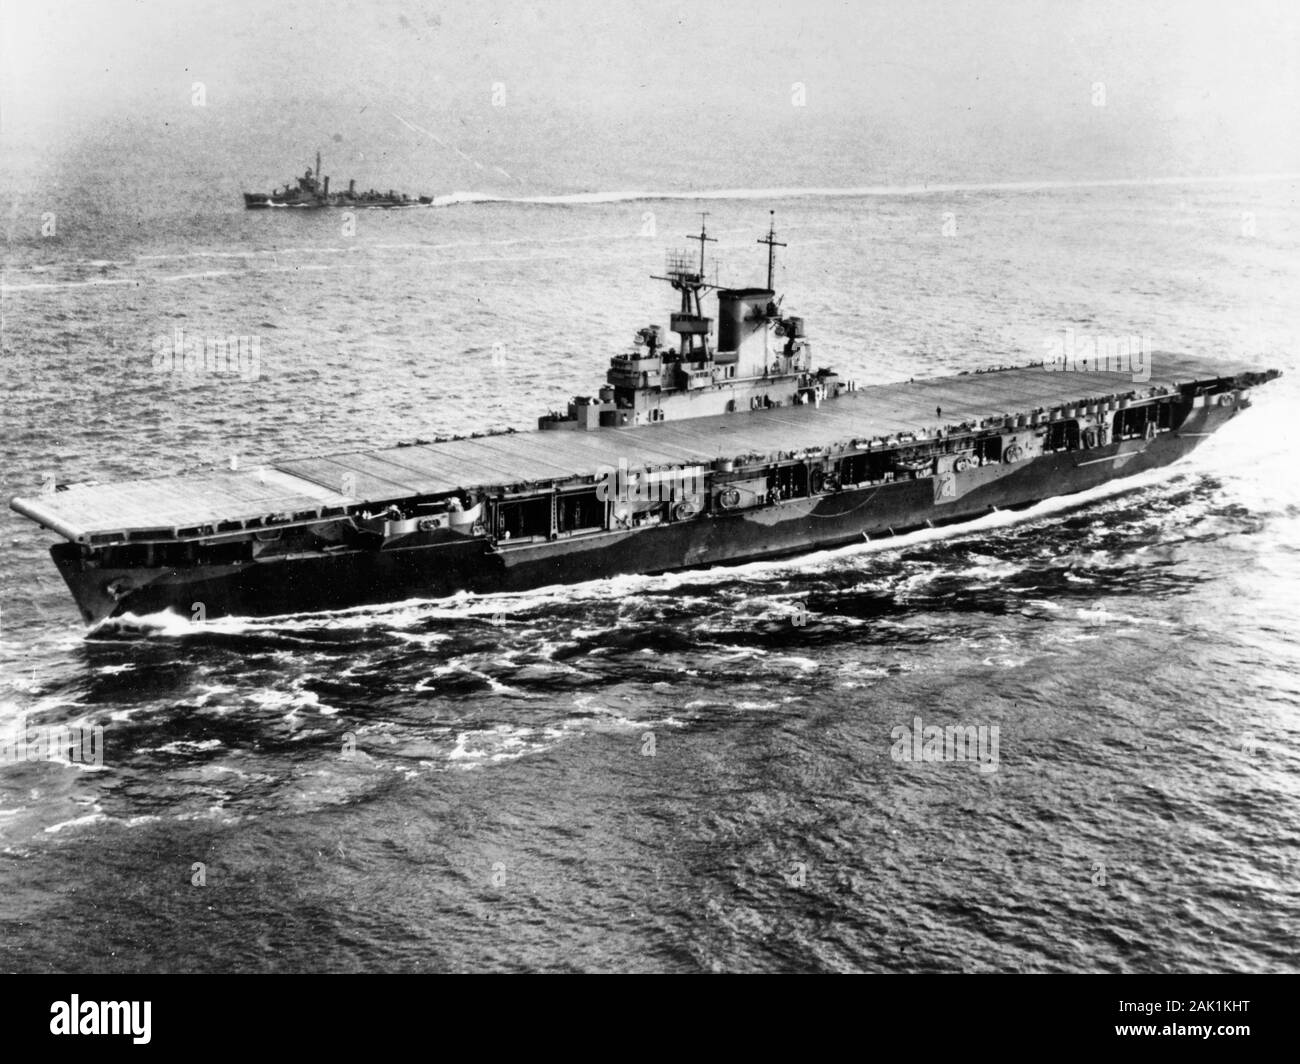 The U.S. Navy aircraft carrier USS Wasp (CV-7) entering Hampton Roads, Virginia (USA), on 26 May 1942. The escorting destroyer USS Edison (DD-439) is visible in the background. Stock Photo